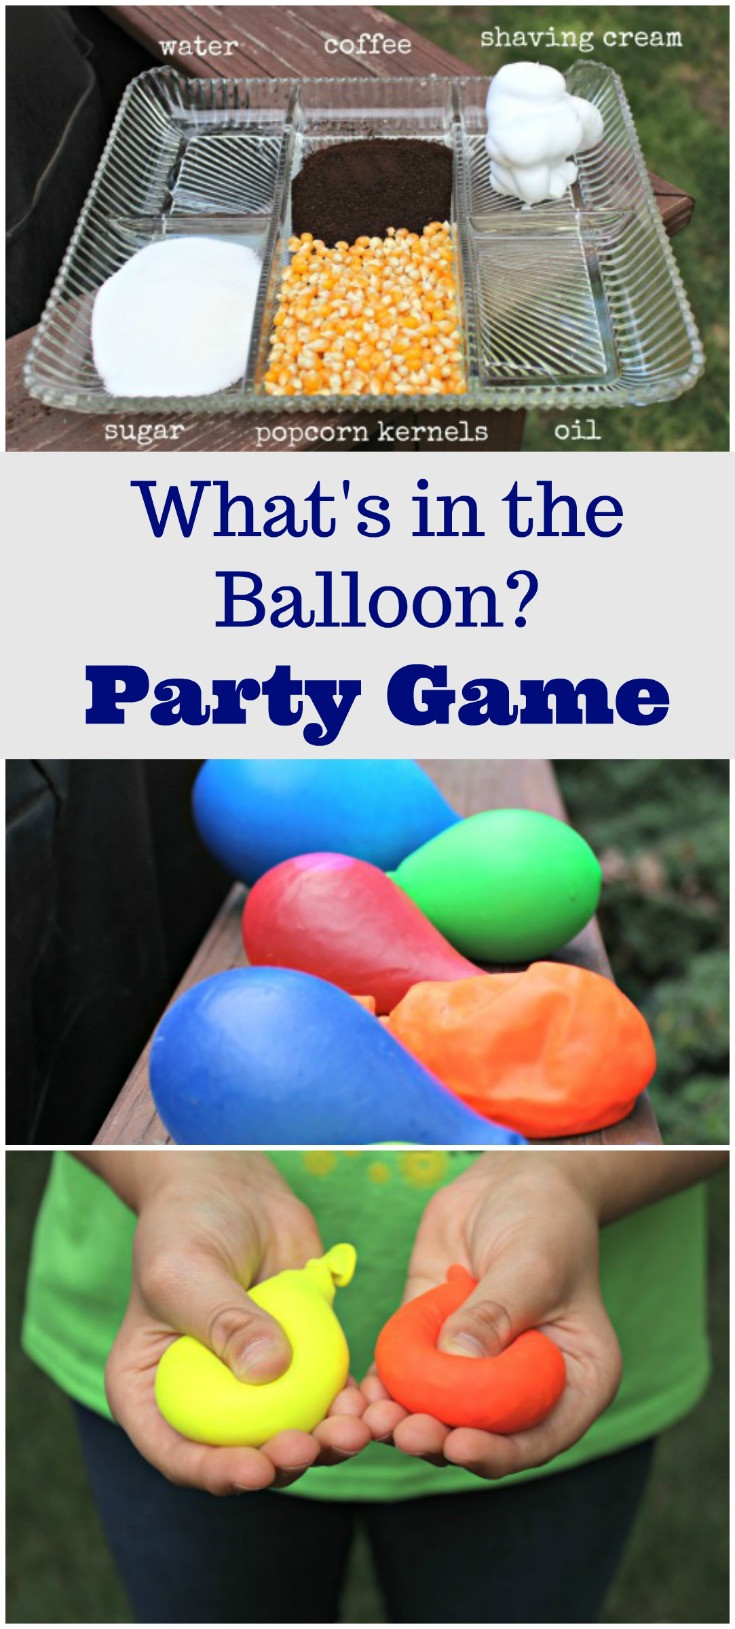 Party Game For Children
 Fun Party Games Guess What s in the Balloon Edventures